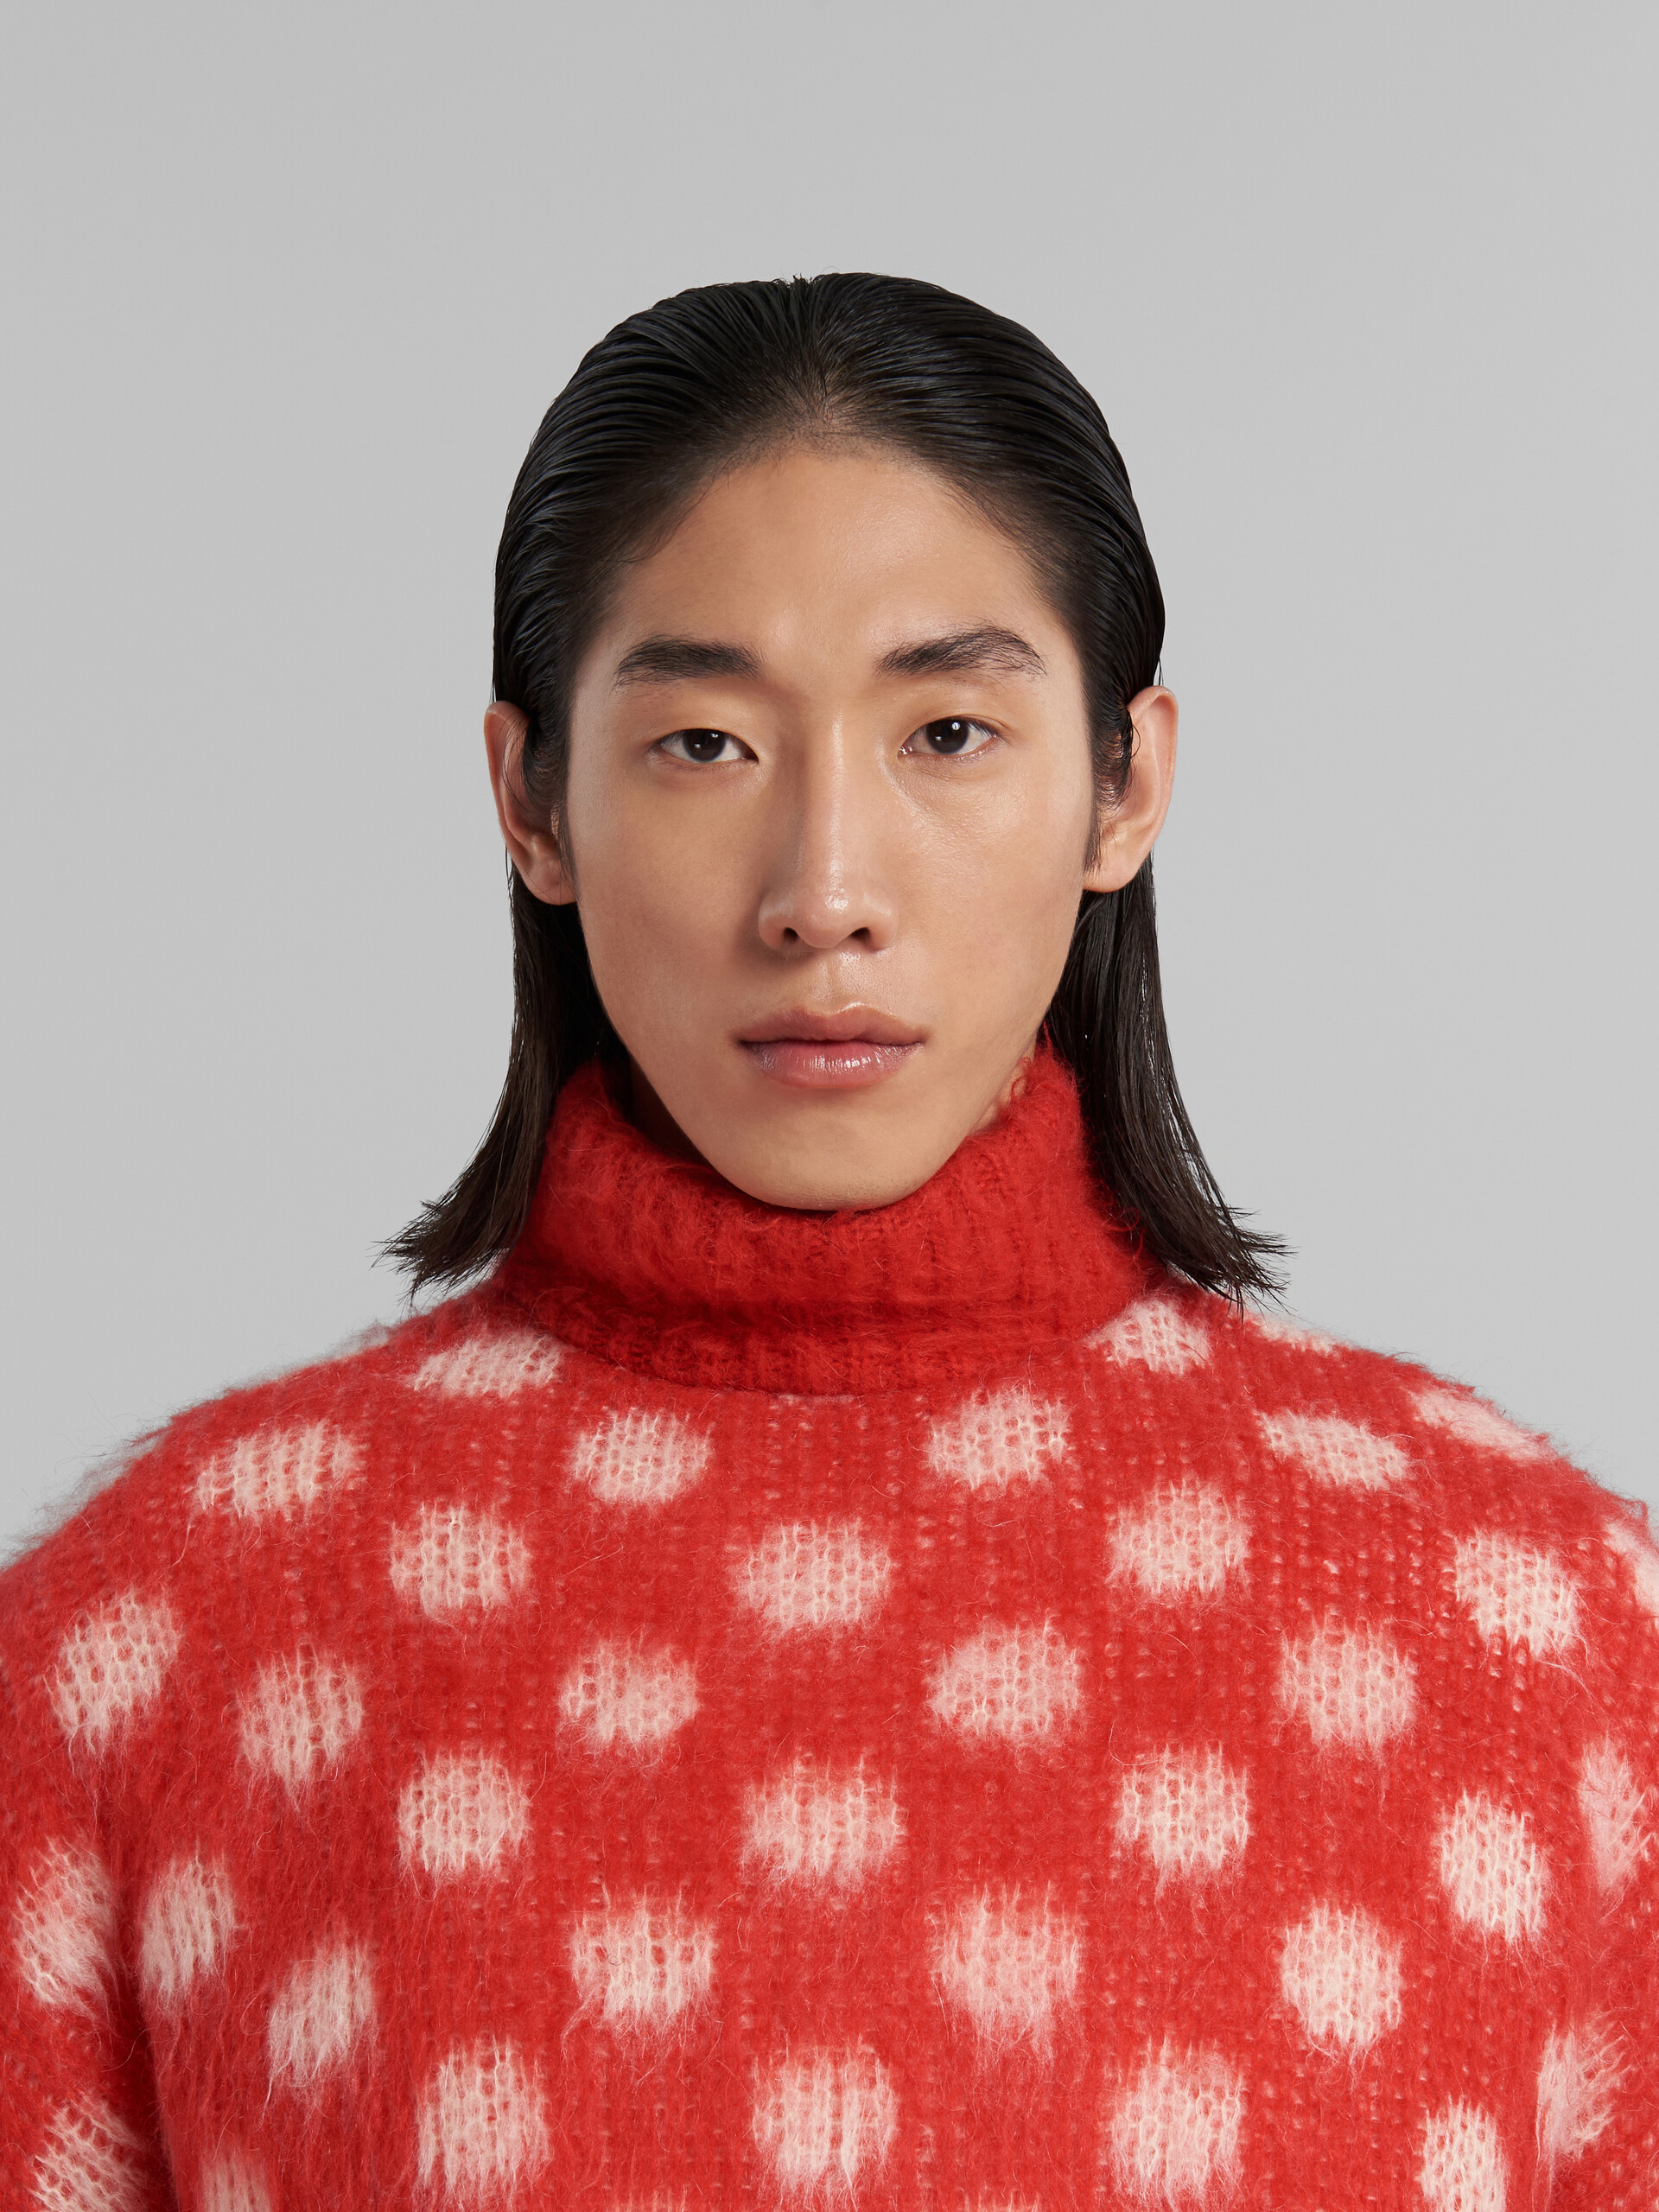 Red puffy mohair jumper with polka dots